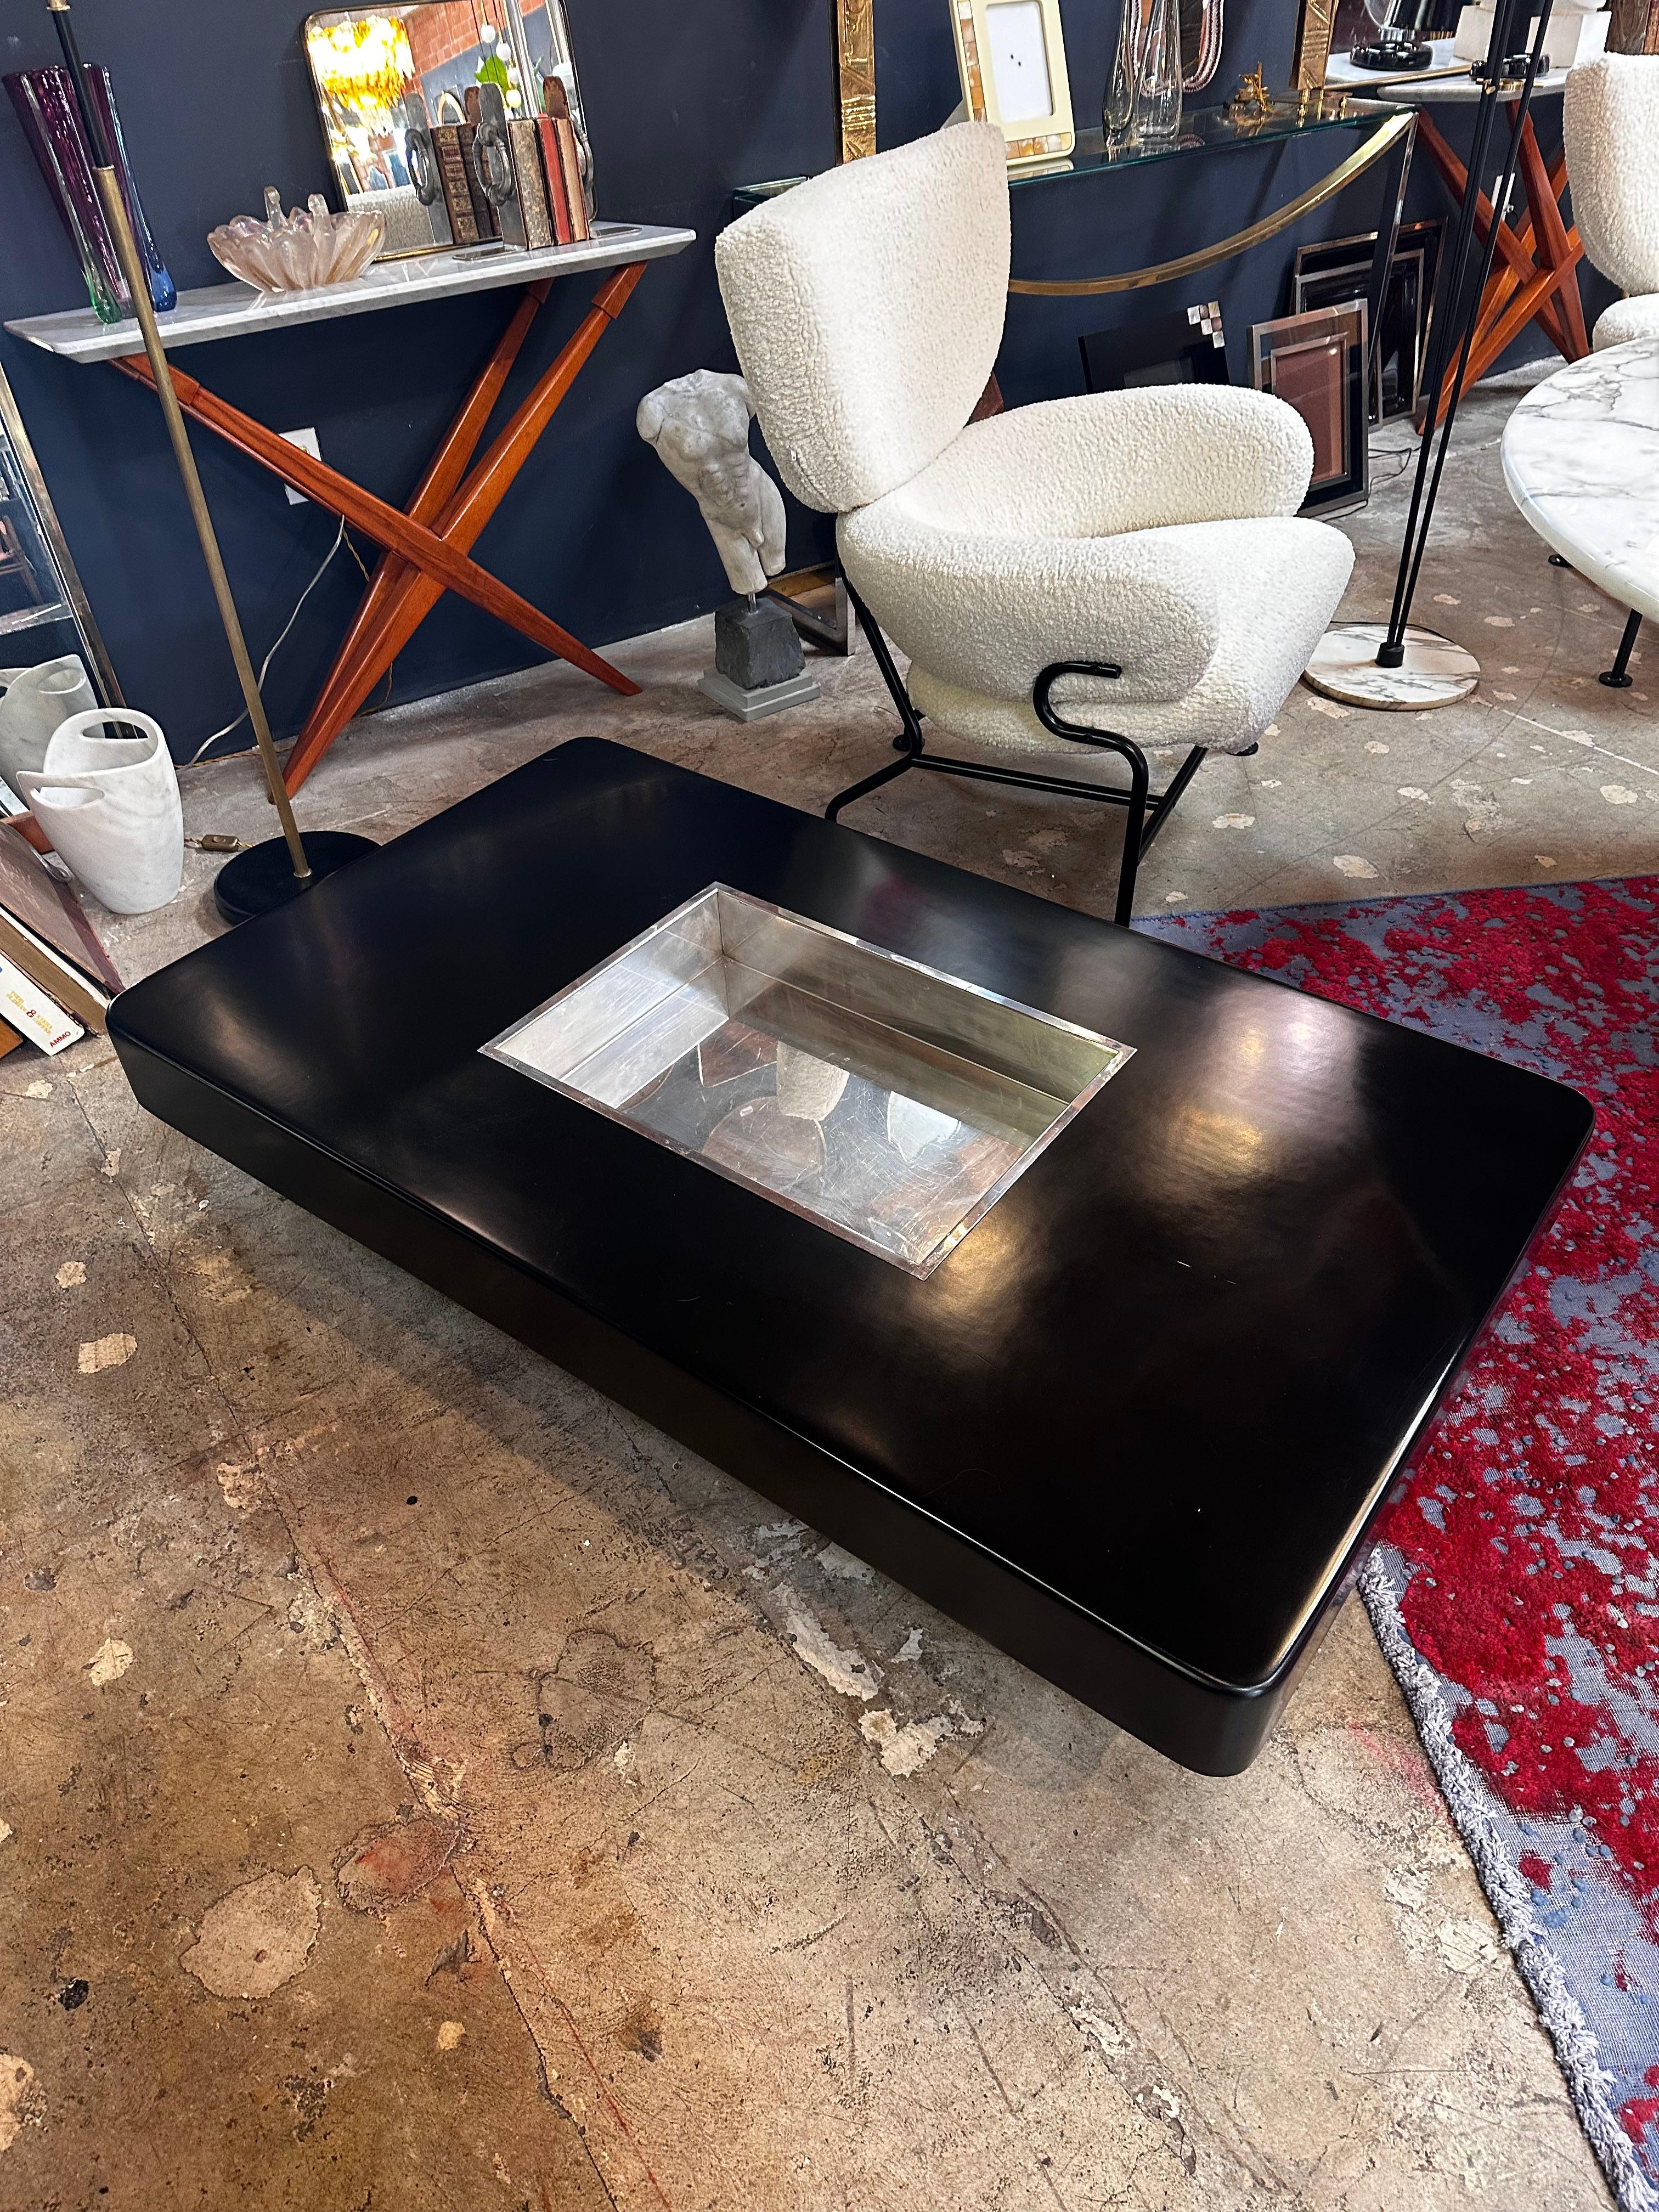 The Willy Rizzo Black Lacquer and Chrome Bar Coffee Table from the 1970s is a chic and distinctive vintage piece. Designed by Willy Rizzo, it combines black lacquer and chrome elements to create a sleek and modern aesthetic. With its bar-like